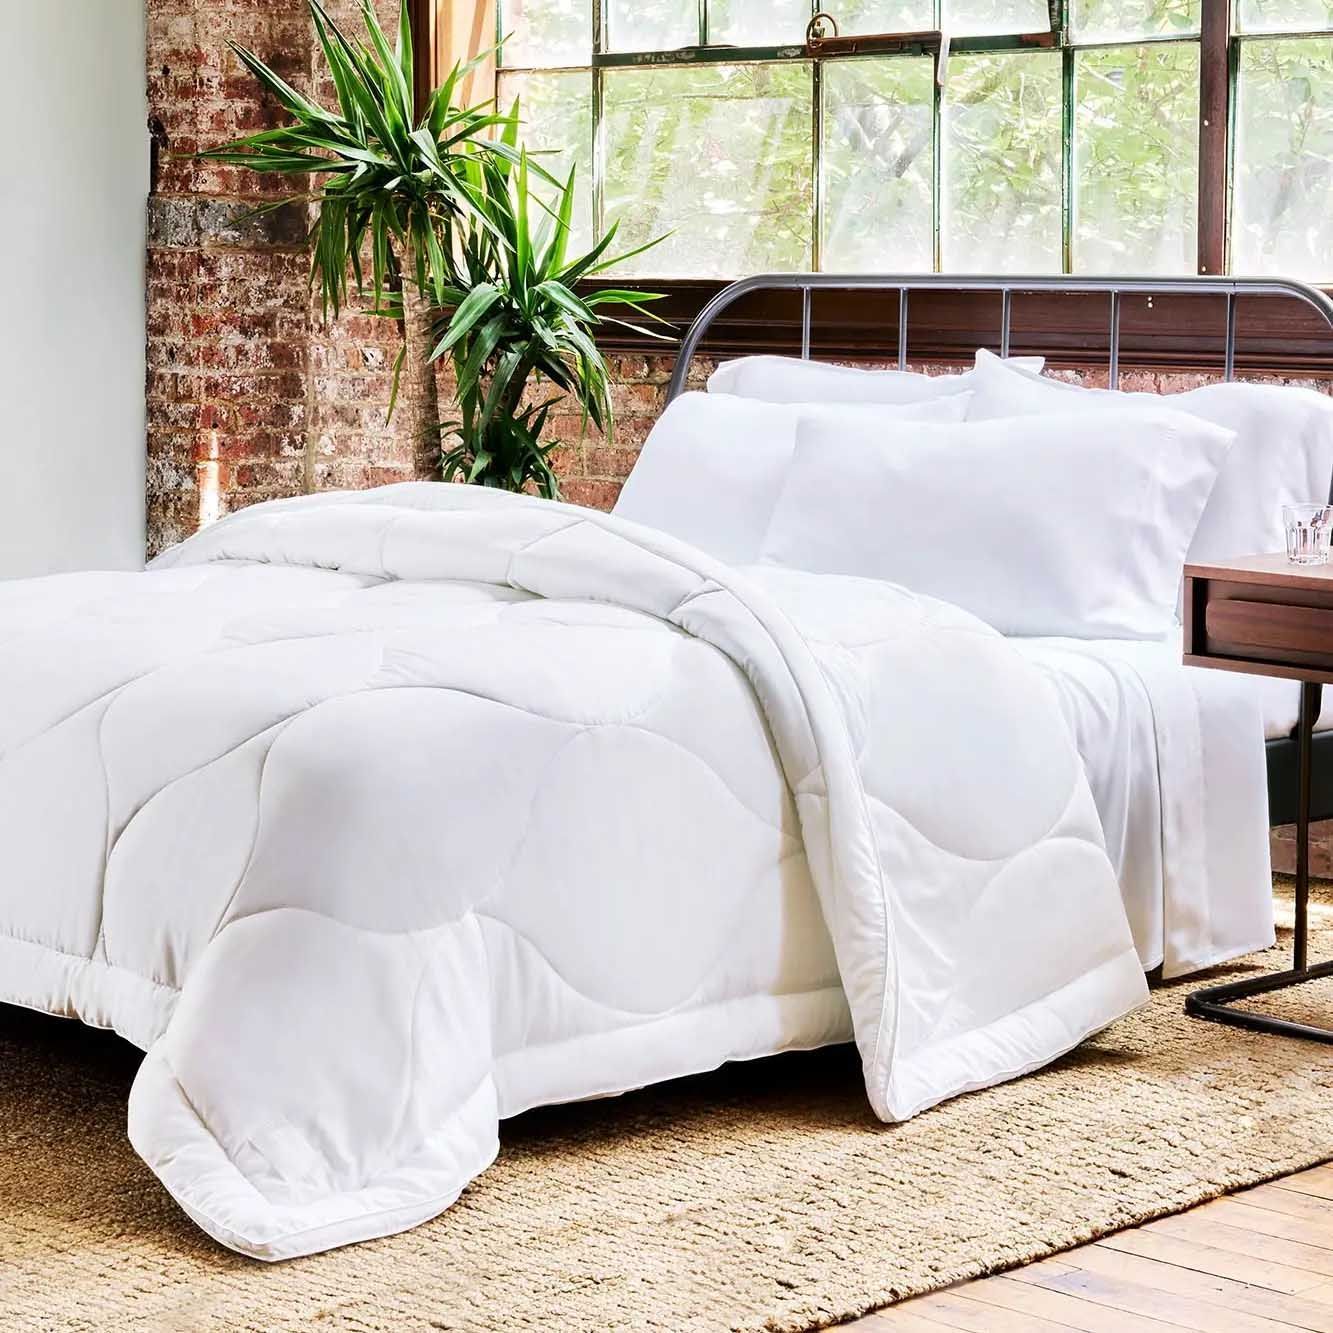 Details about  / Meradiso  Comforter Fluffy and soft comfortable not Heavy Cool to sleep Under .